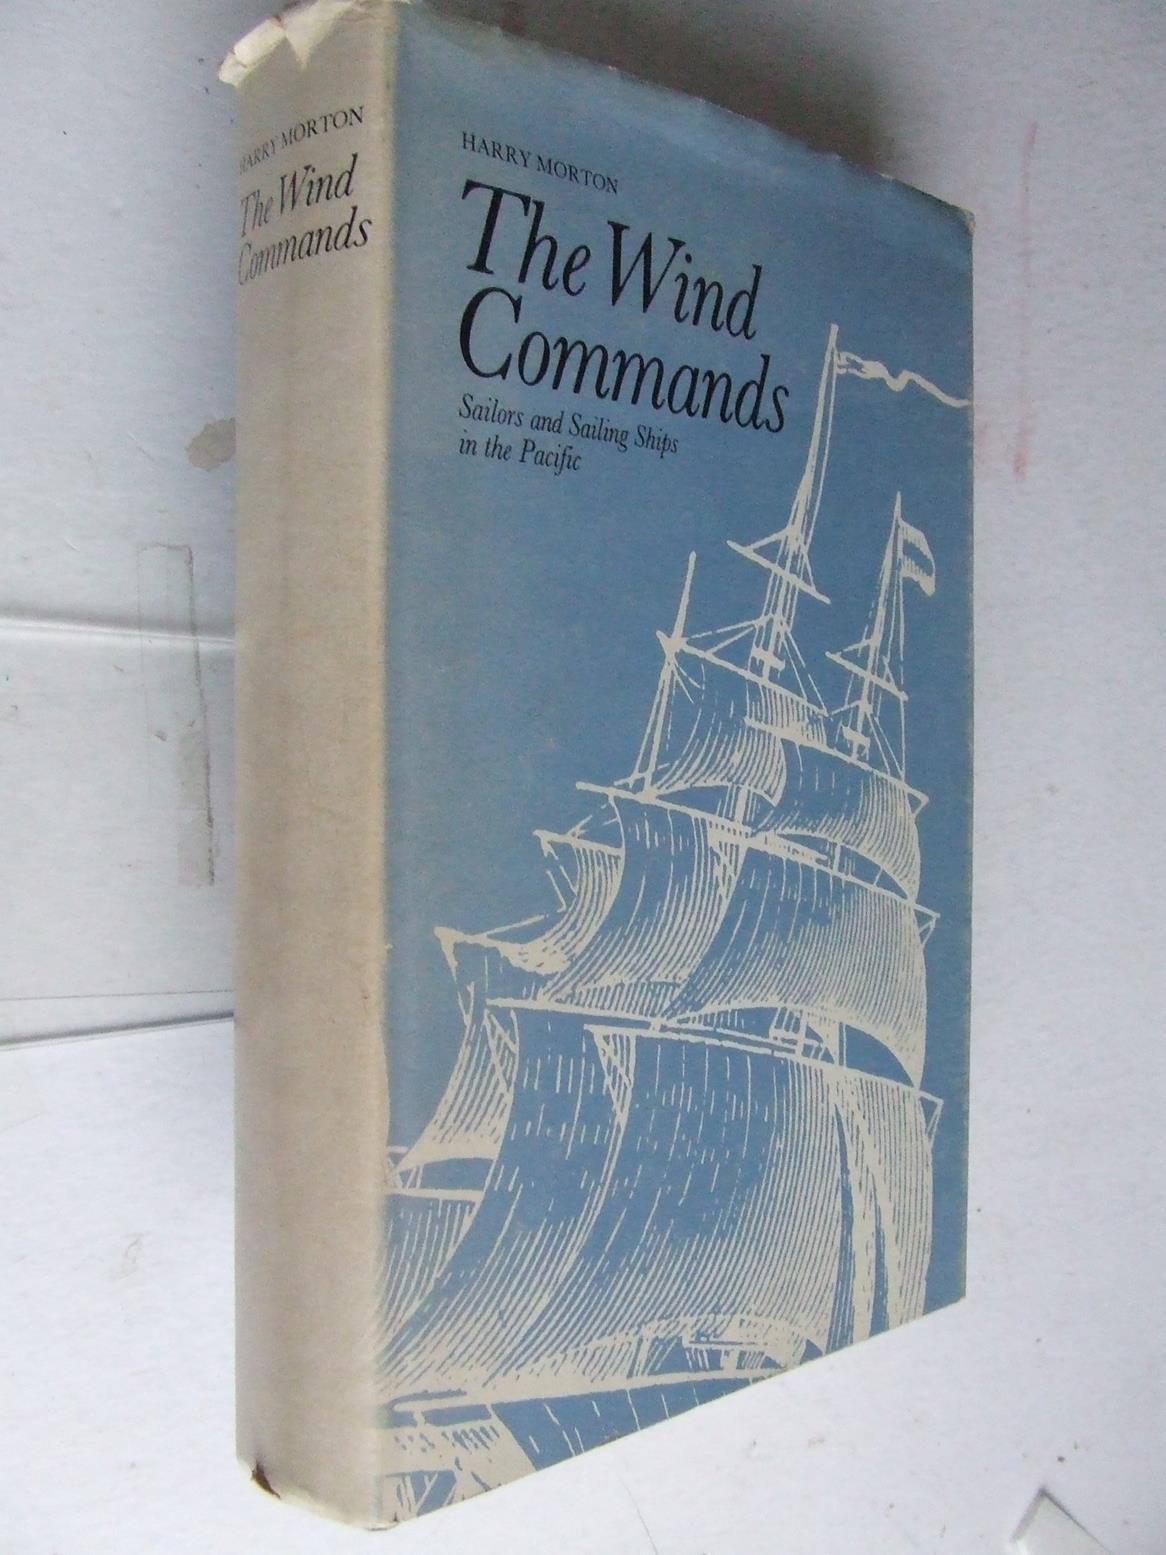 The Wind Commands, sailors and sailing ships in the Pacific